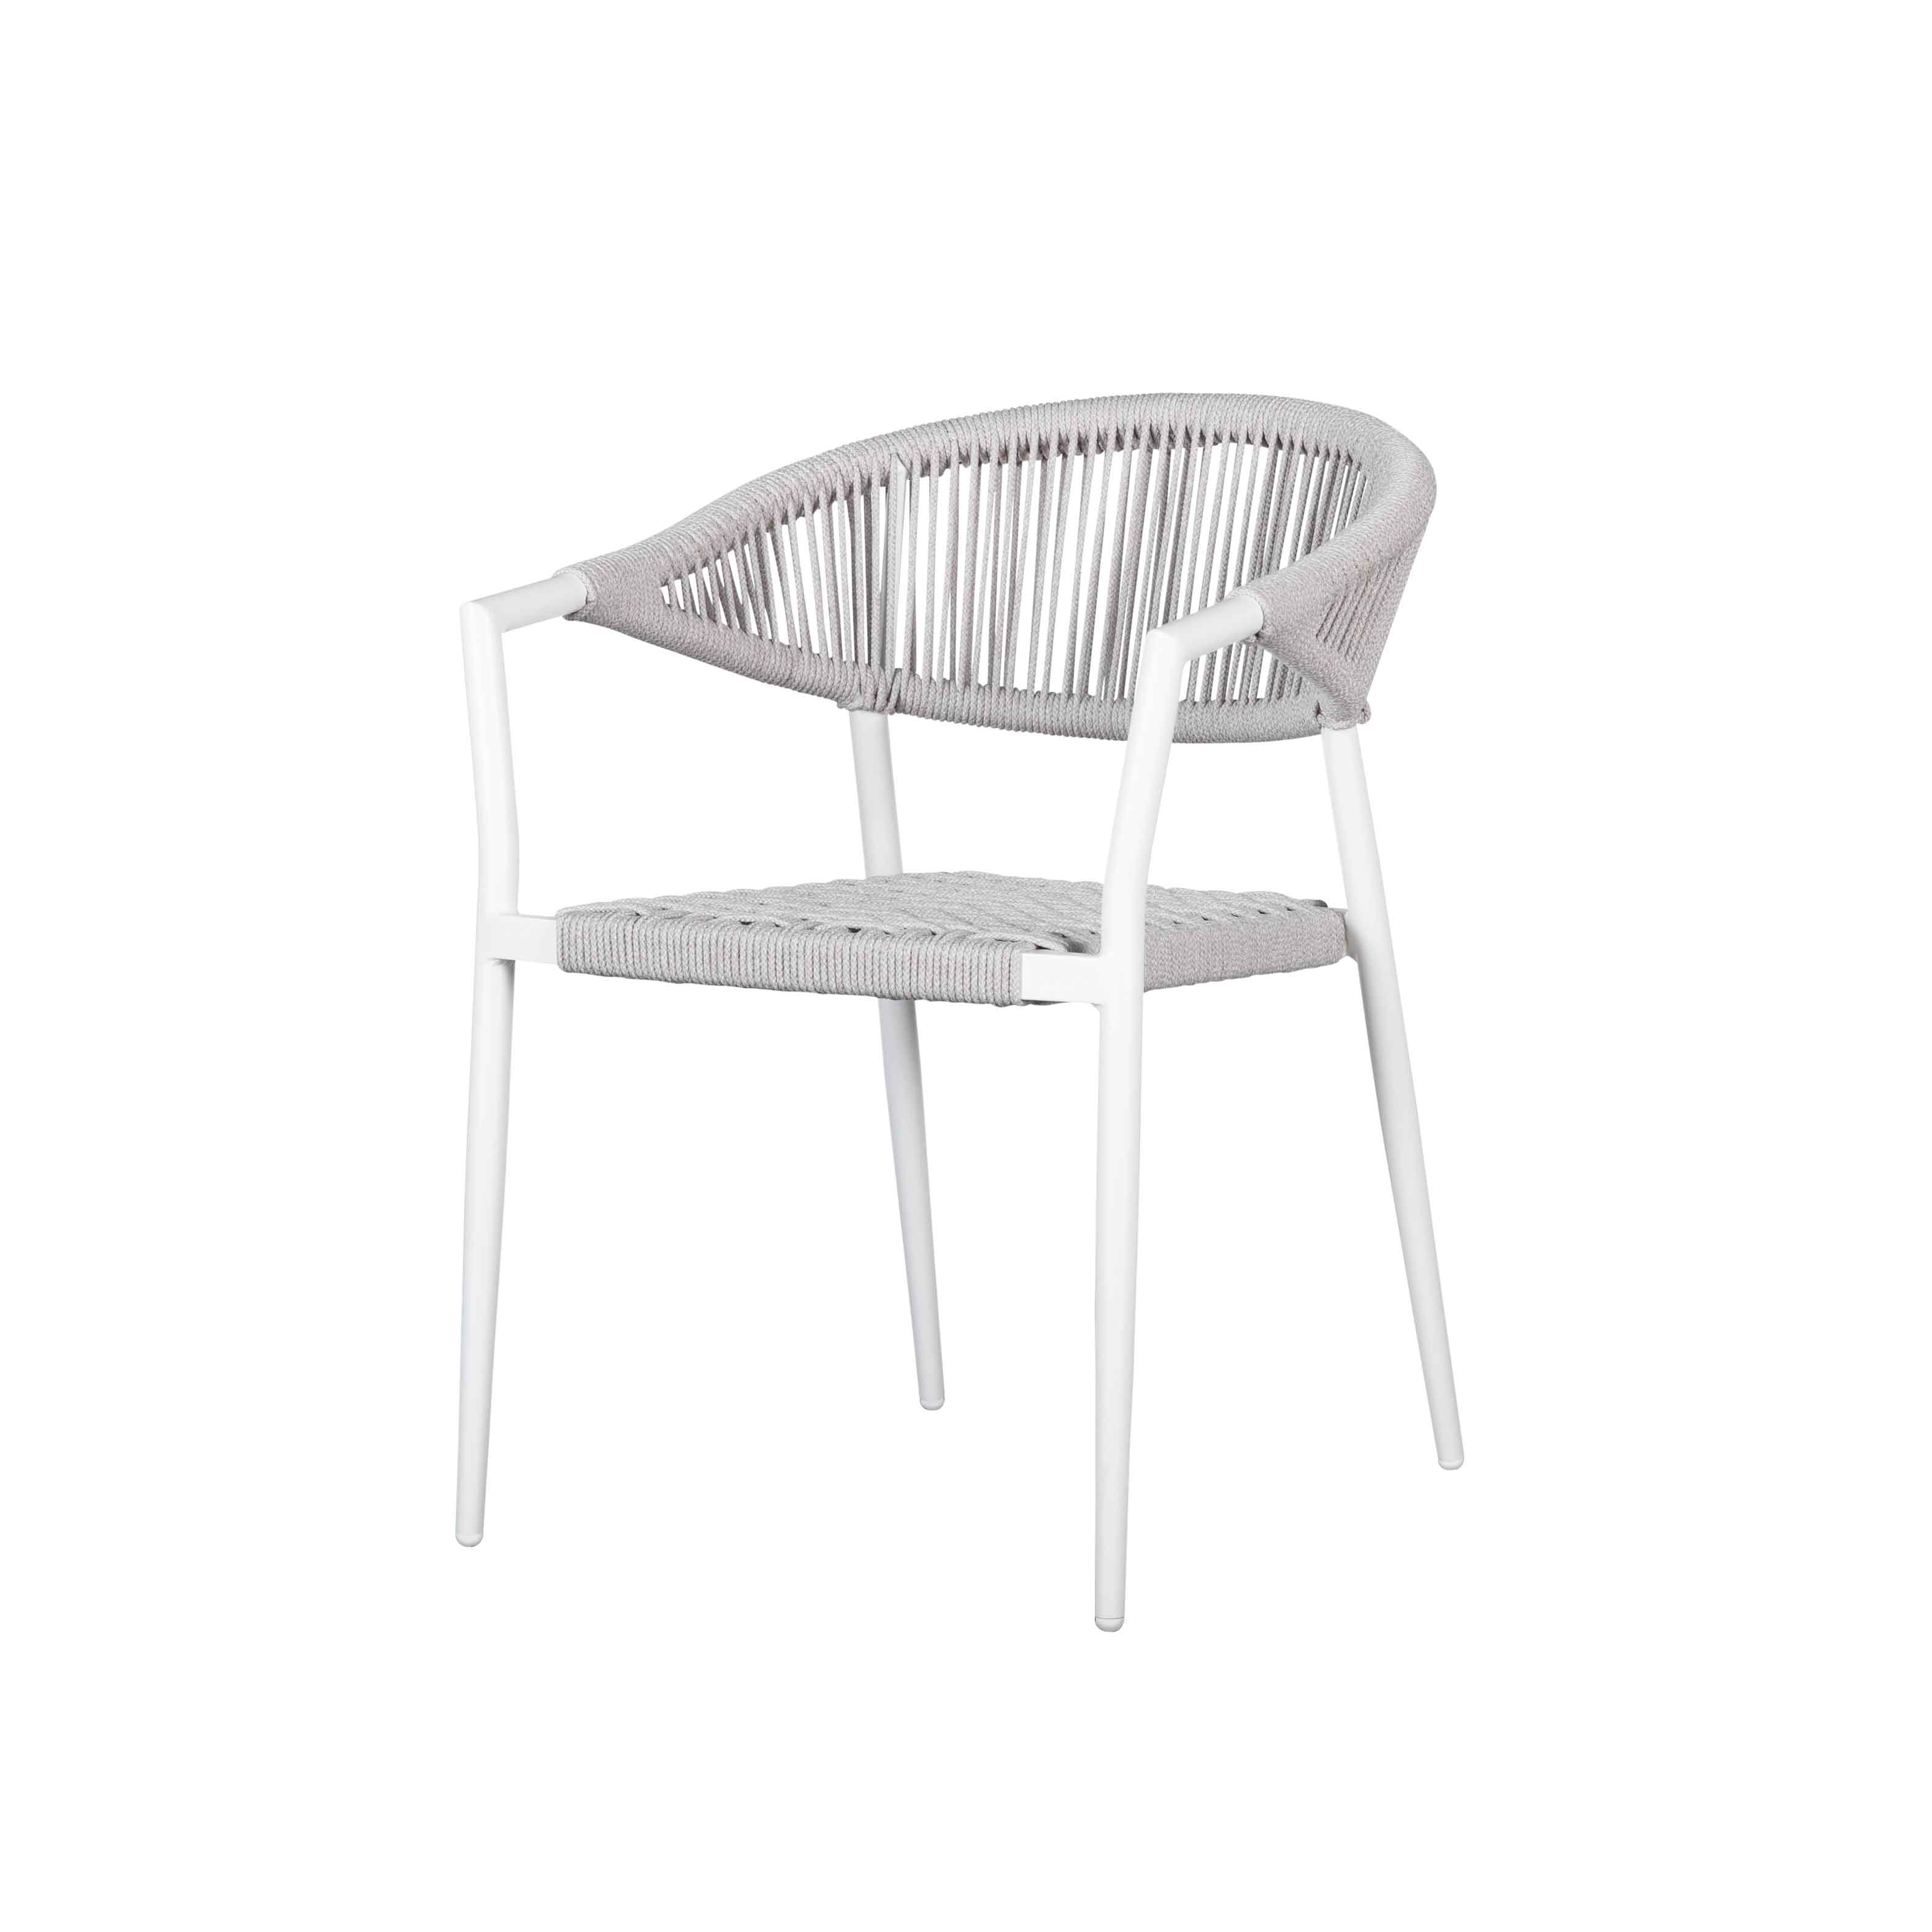 Camila rope dining chair S7